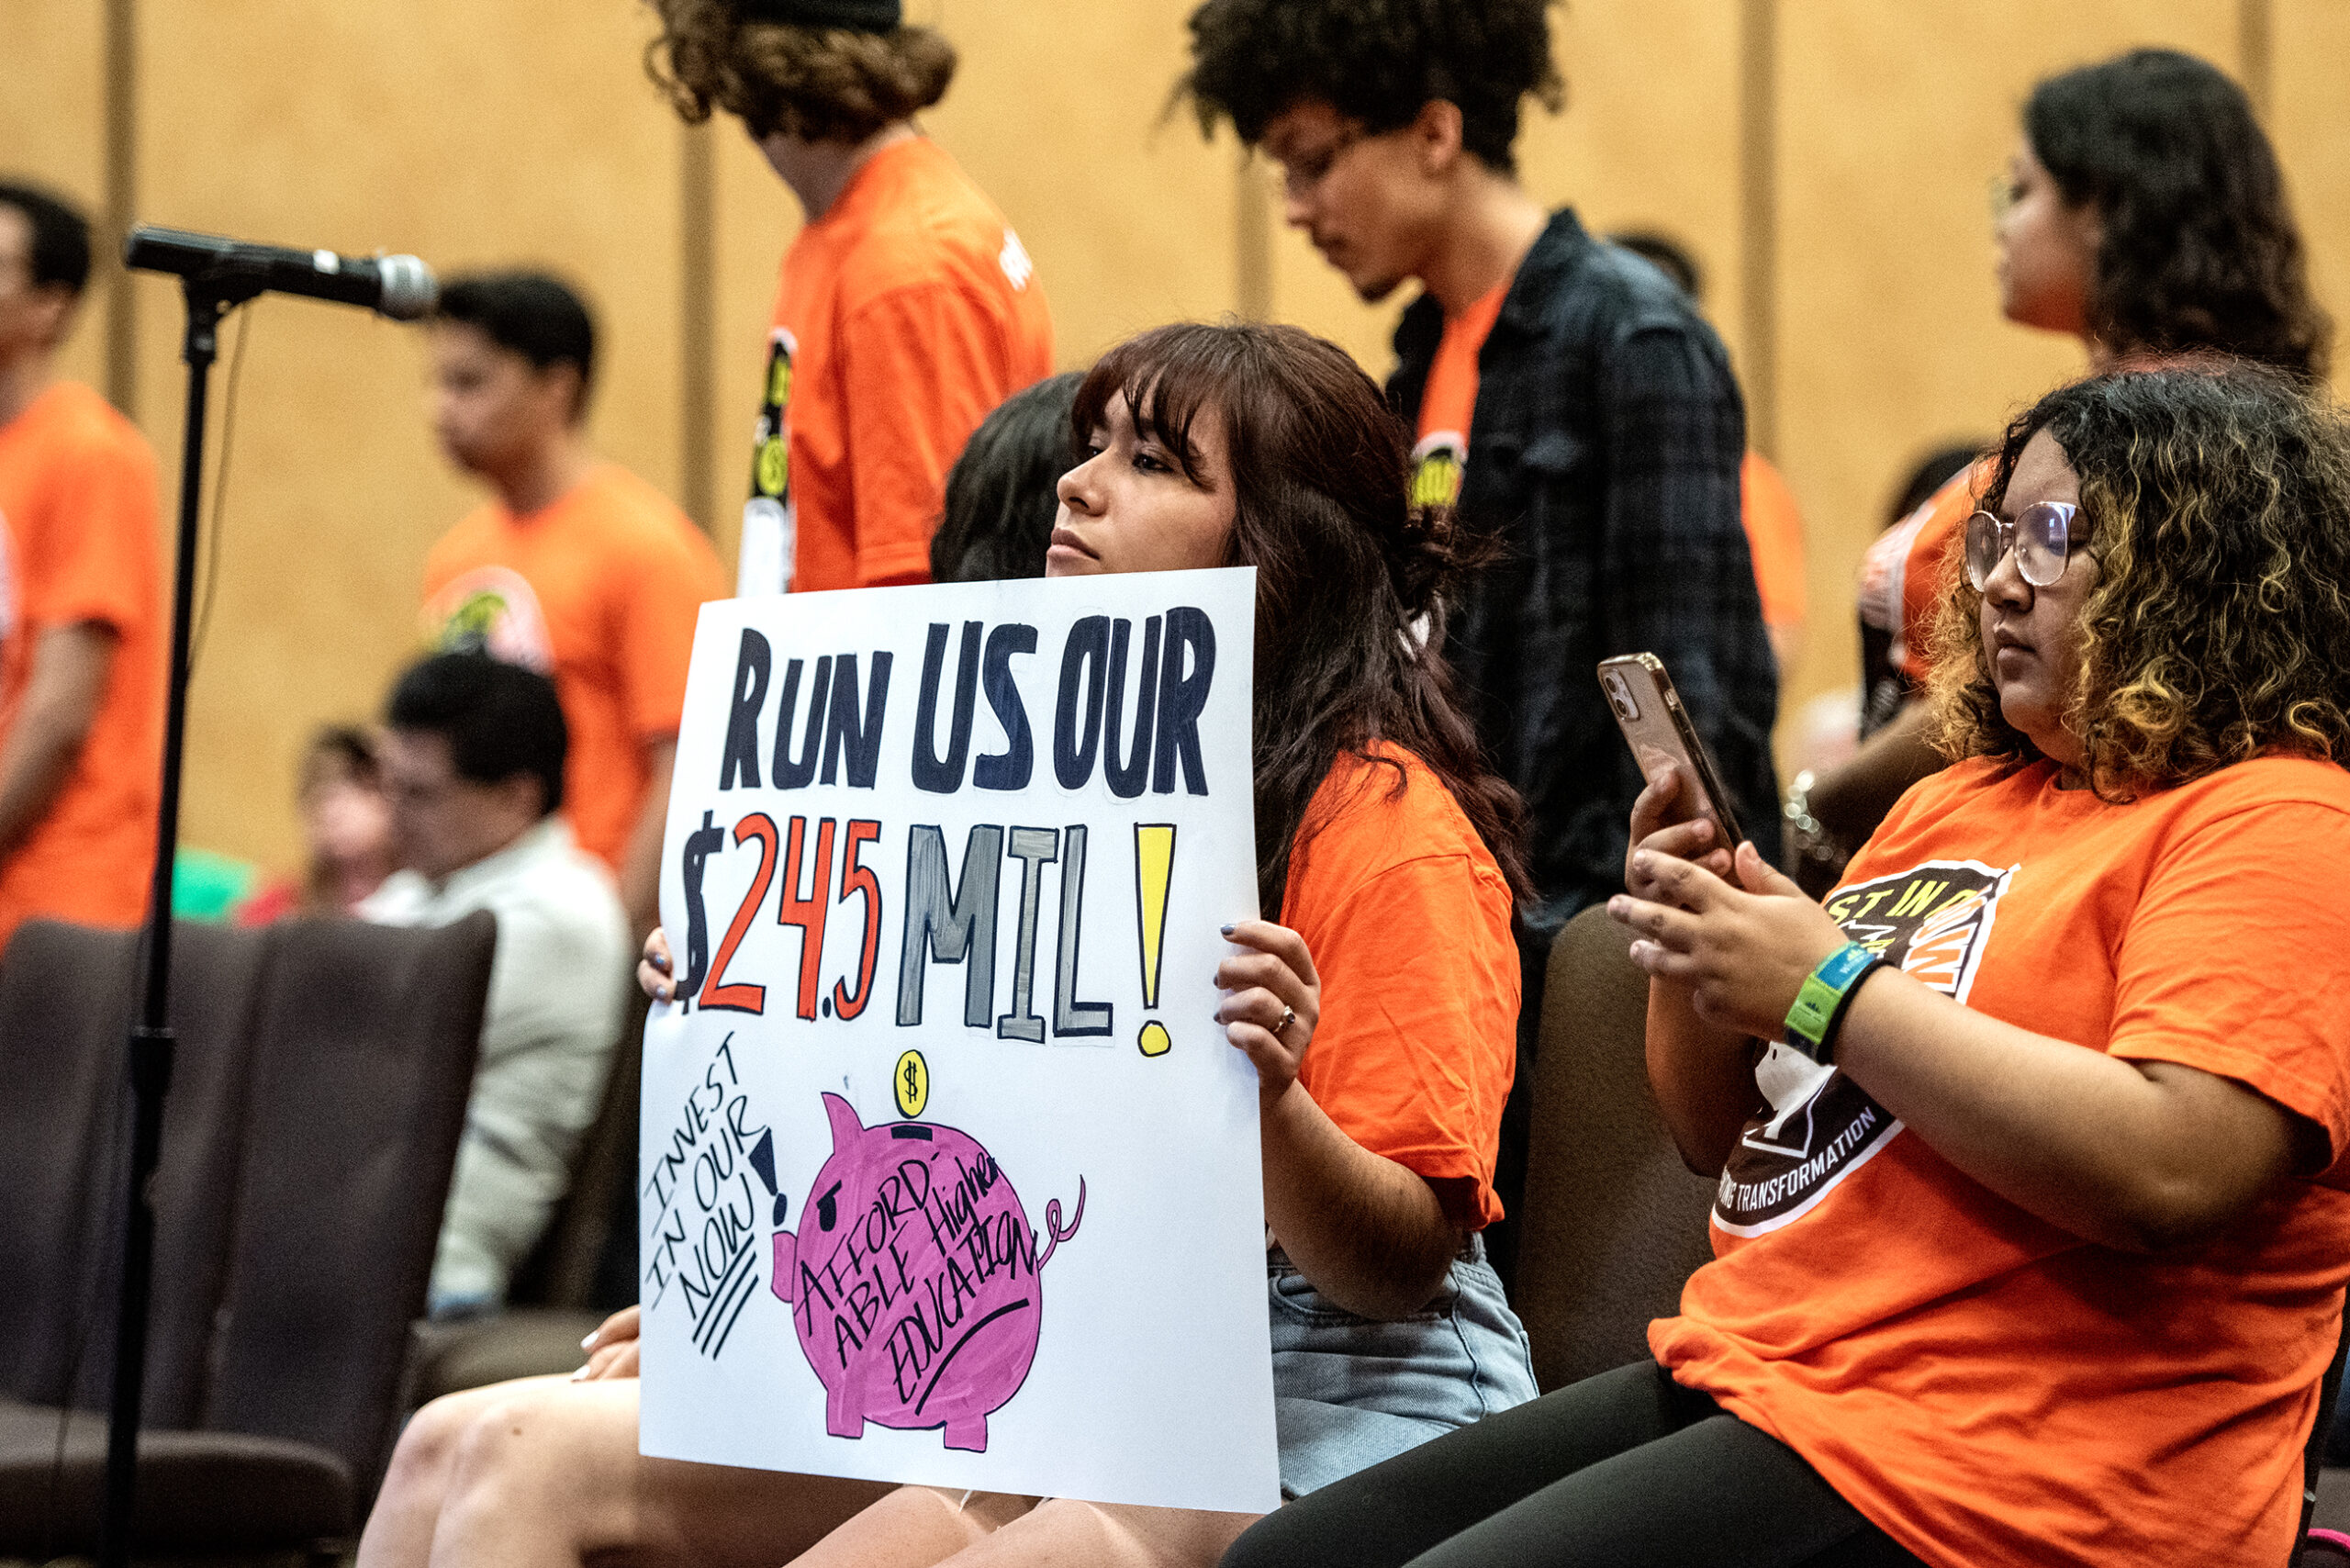 A woman holds a sign that says "Run us our $24.5 mil!"